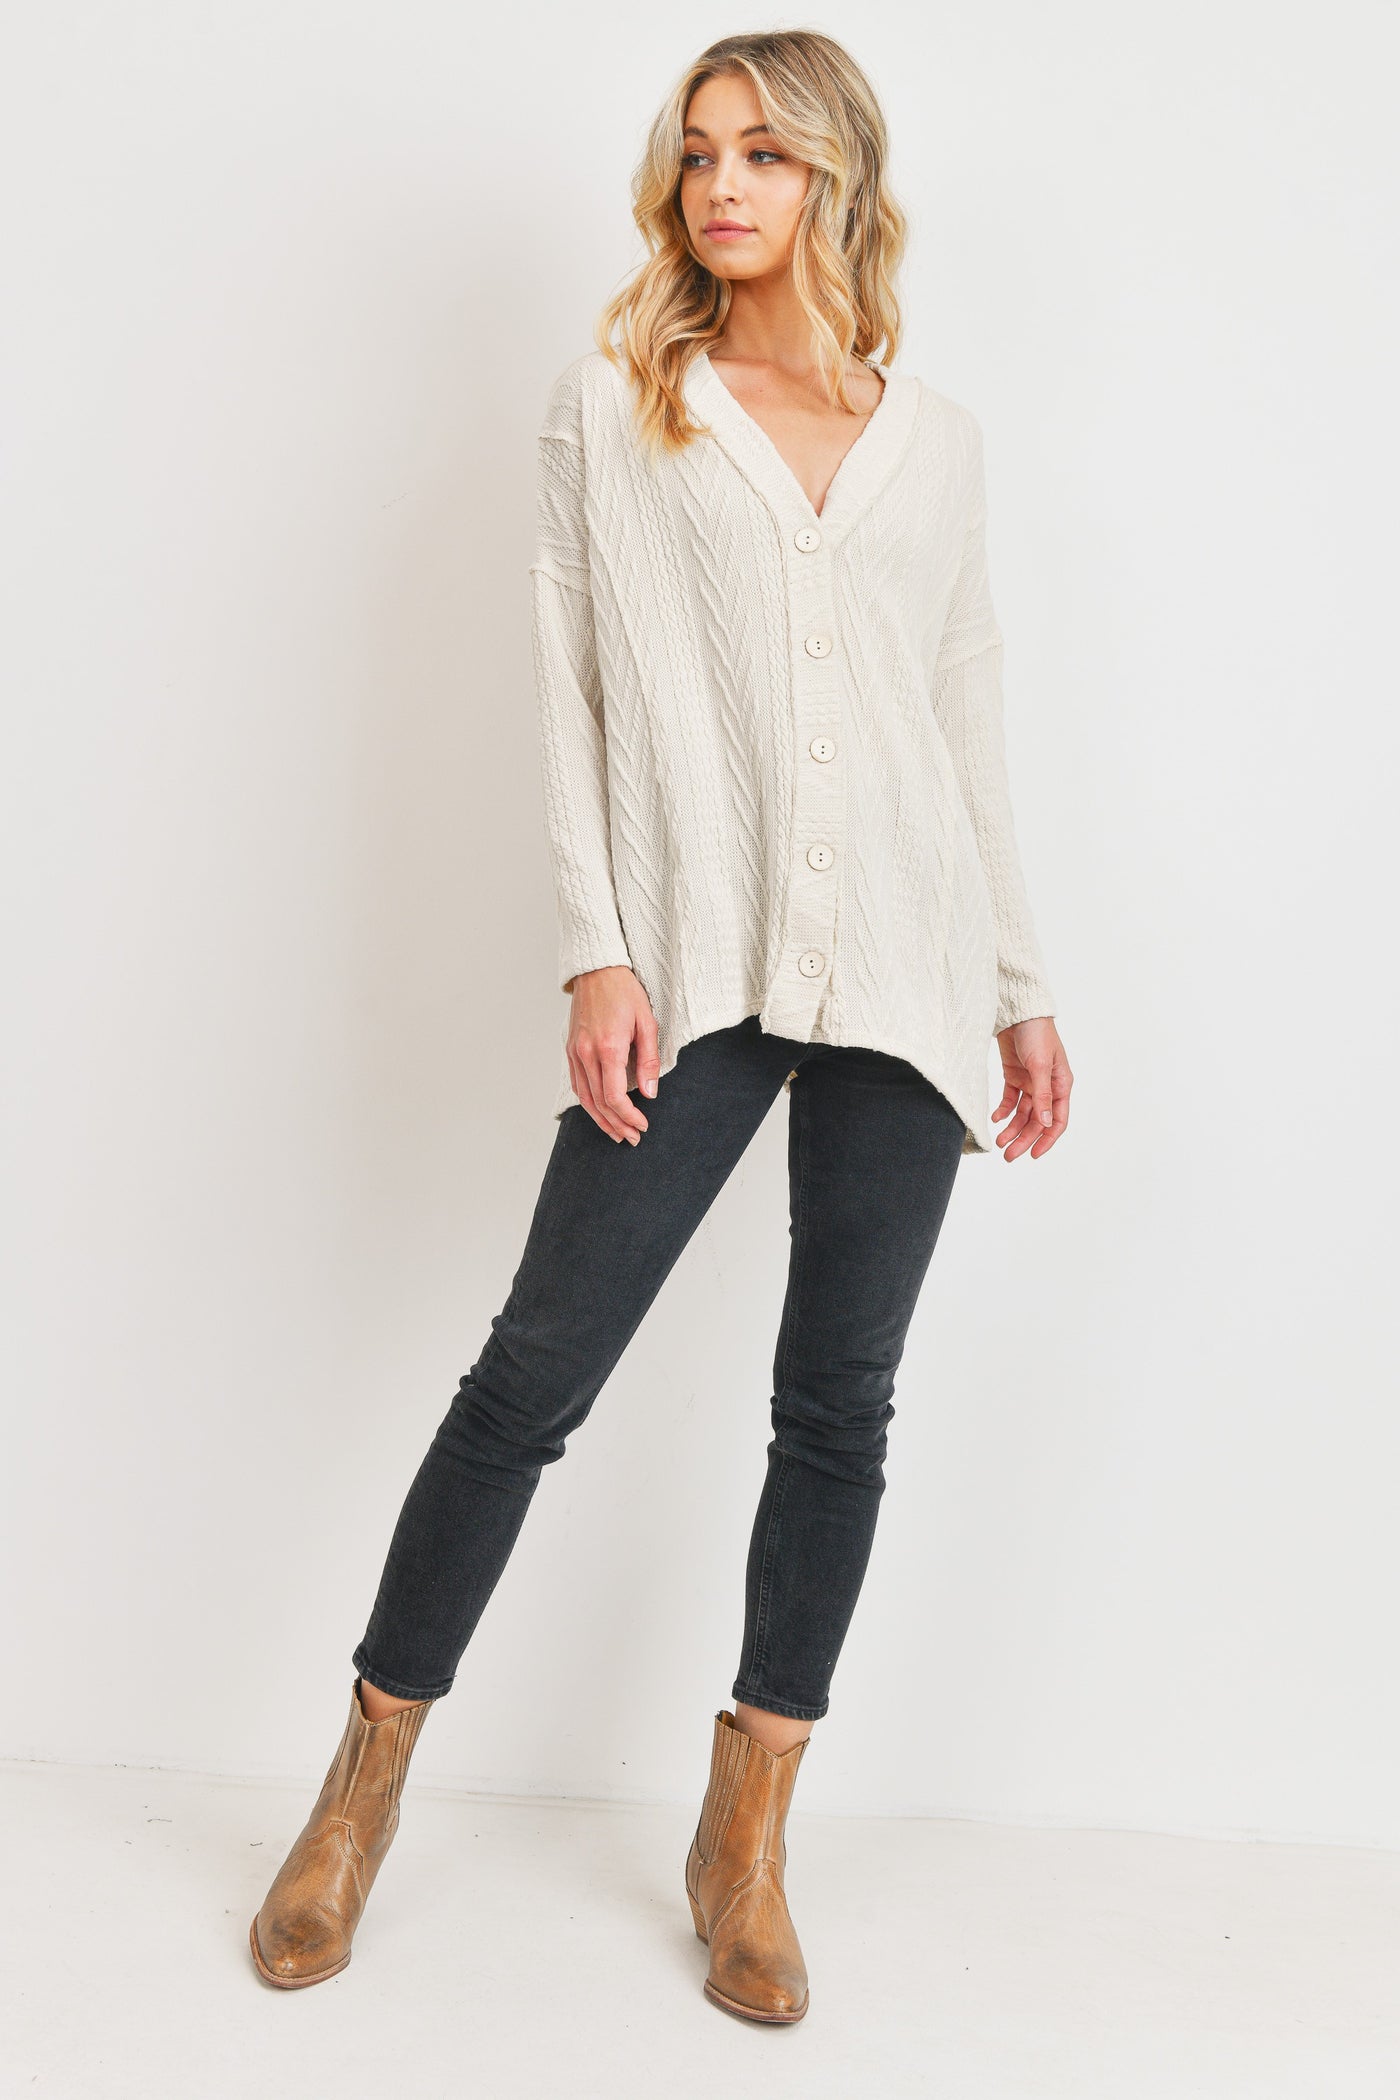 Snow Bunny - L/S Cable Knit Cardigan